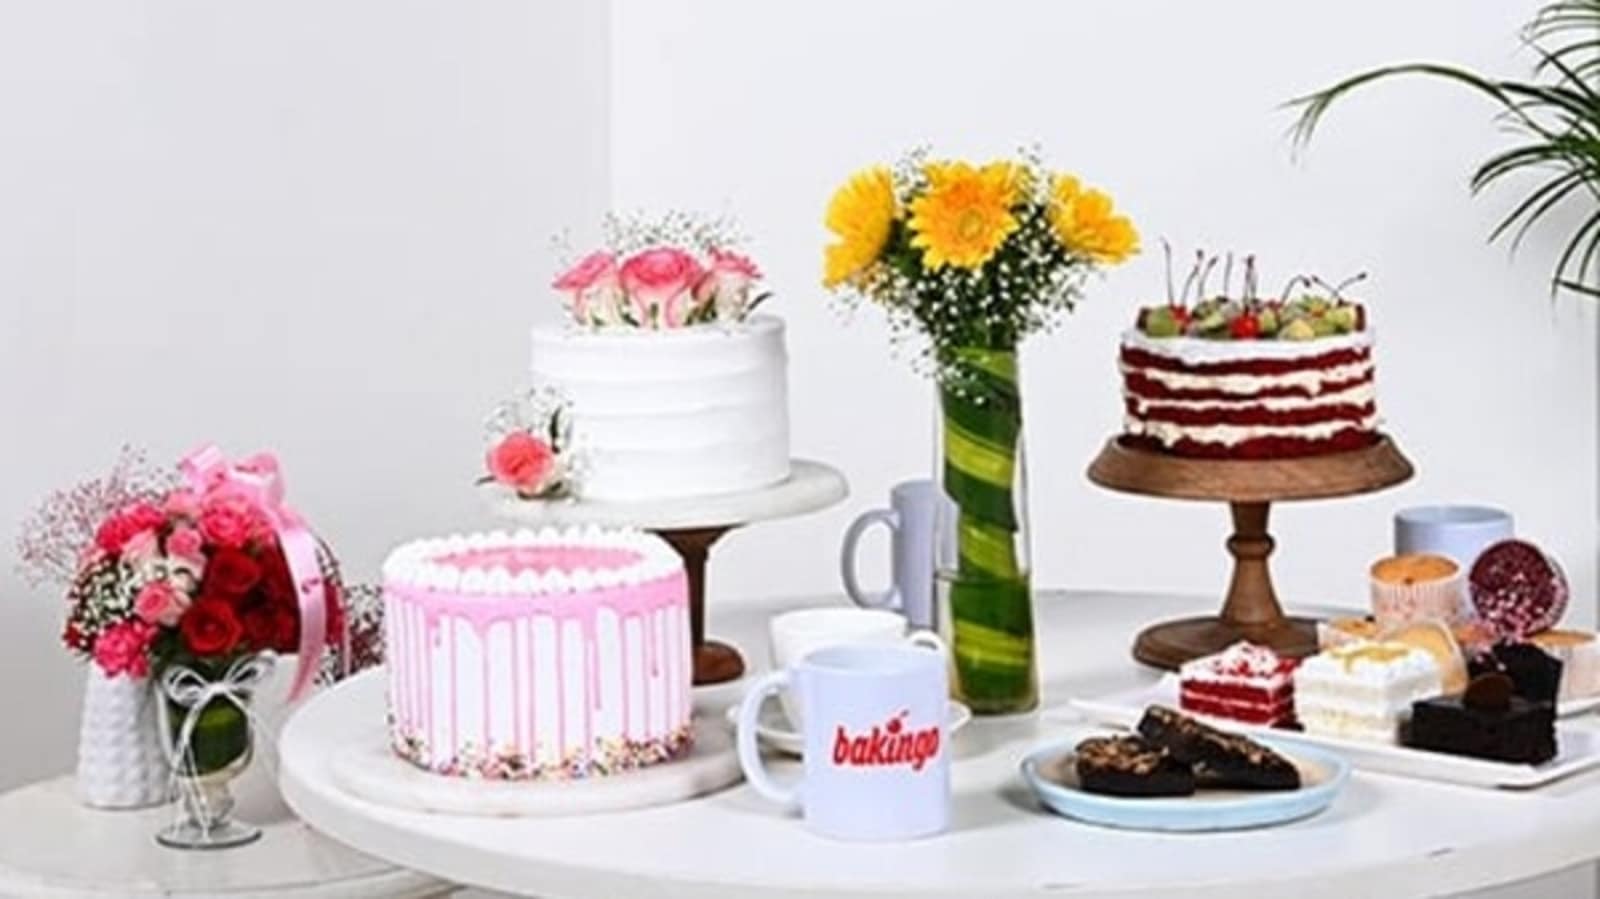 5 Best Places To Find Cakes In Faridabad - Bakingo Blog